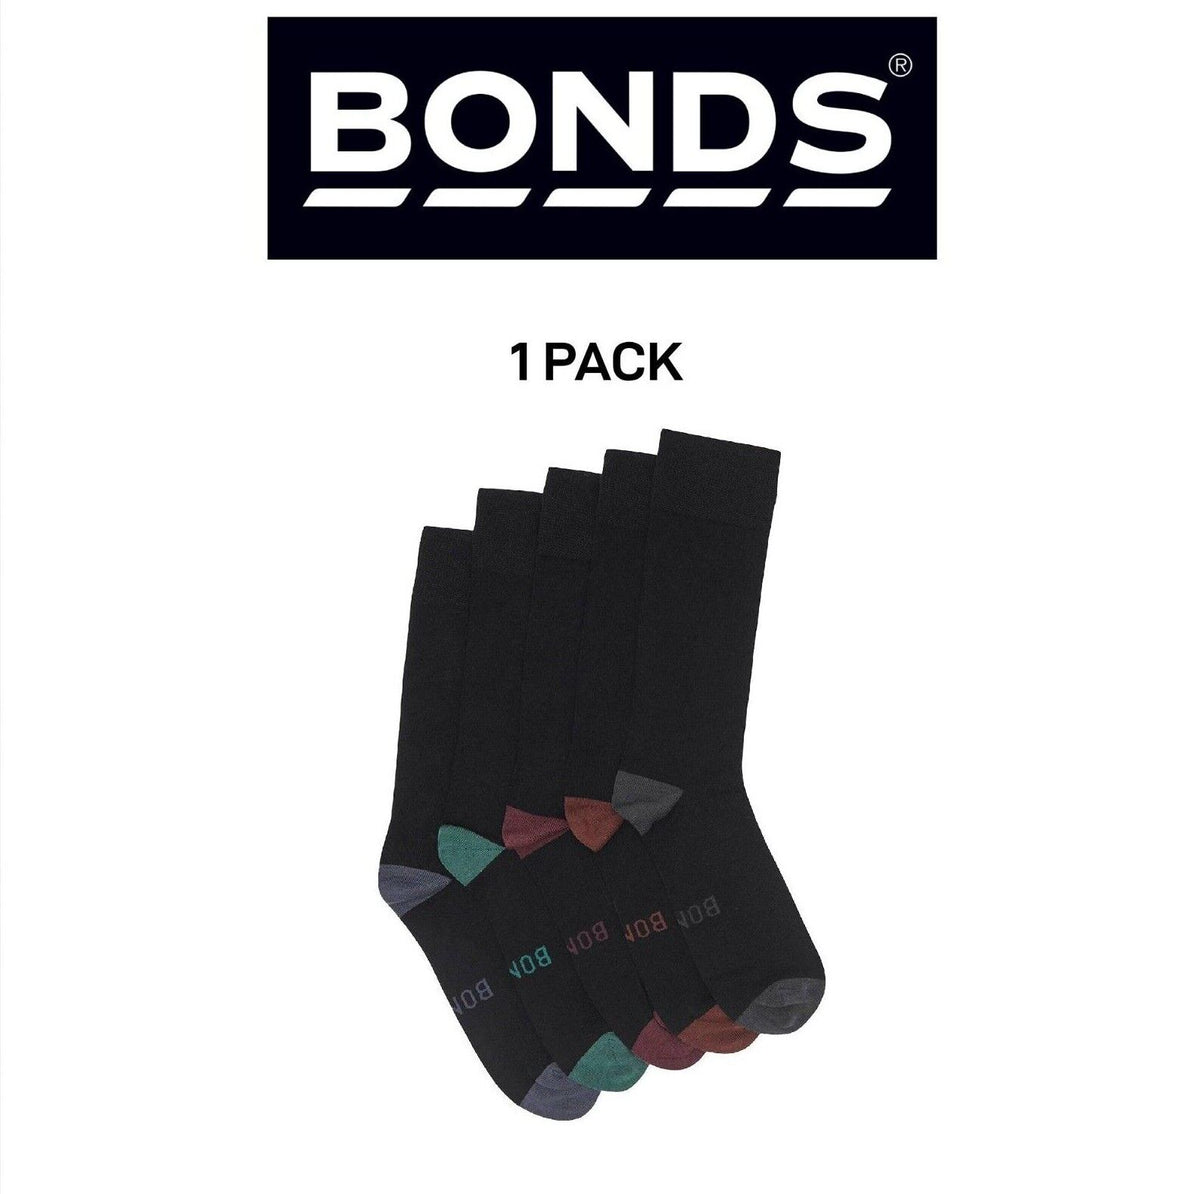 Bonds Mens Bamboo Crew Socks Fine Seams for Comfy Toes & Ankle Support SZFQ5W